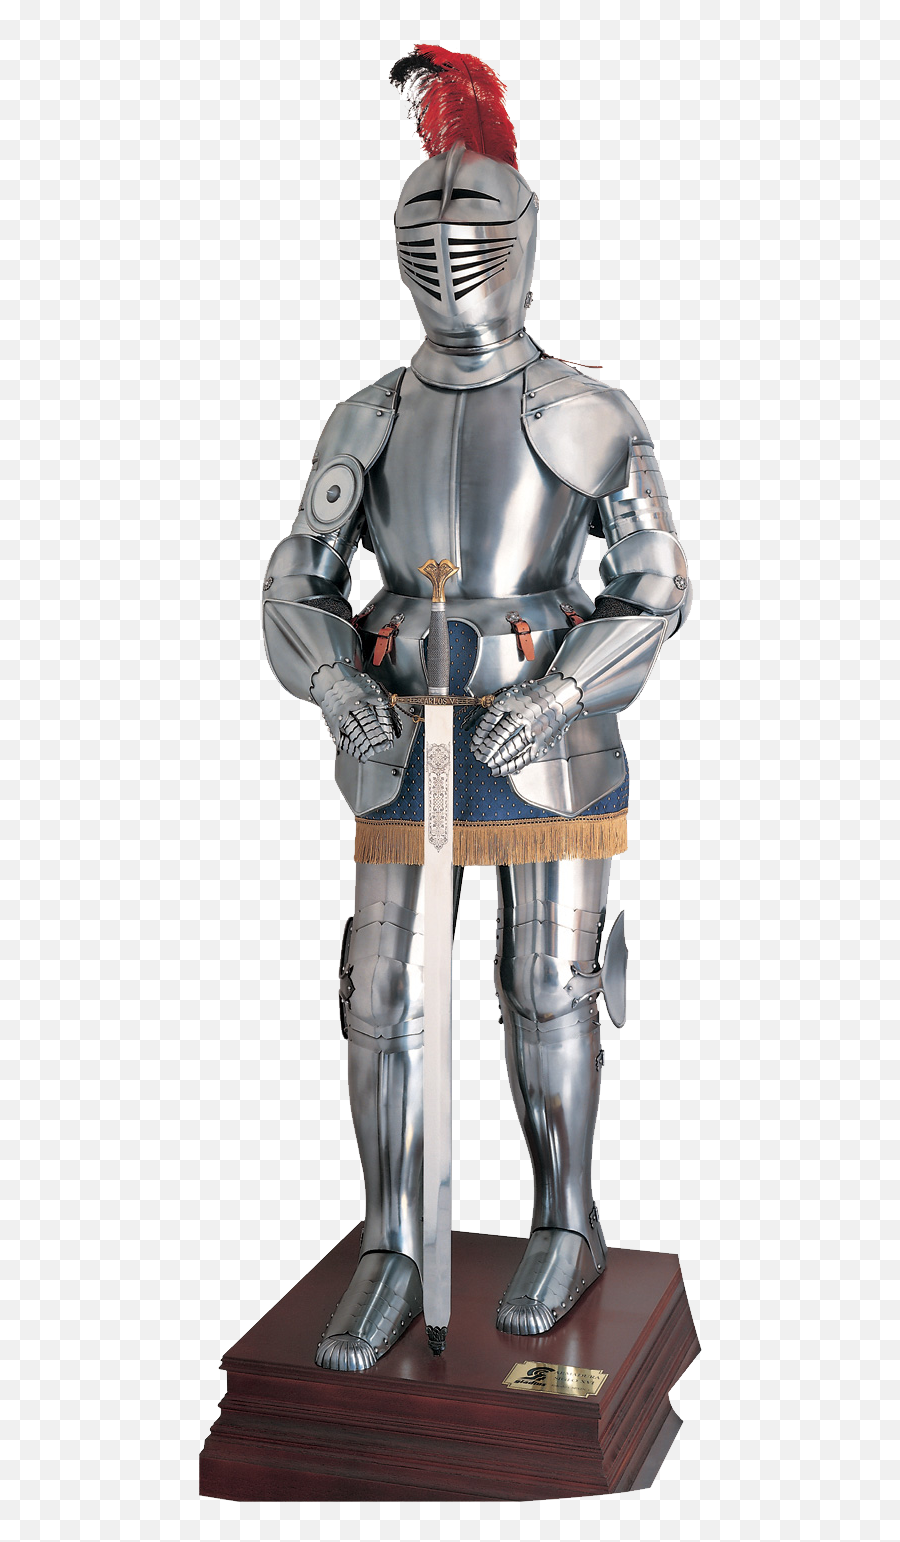 Armour Png Images Free Download Knight - Spanish Medieval Armor,Knight Transparent Background